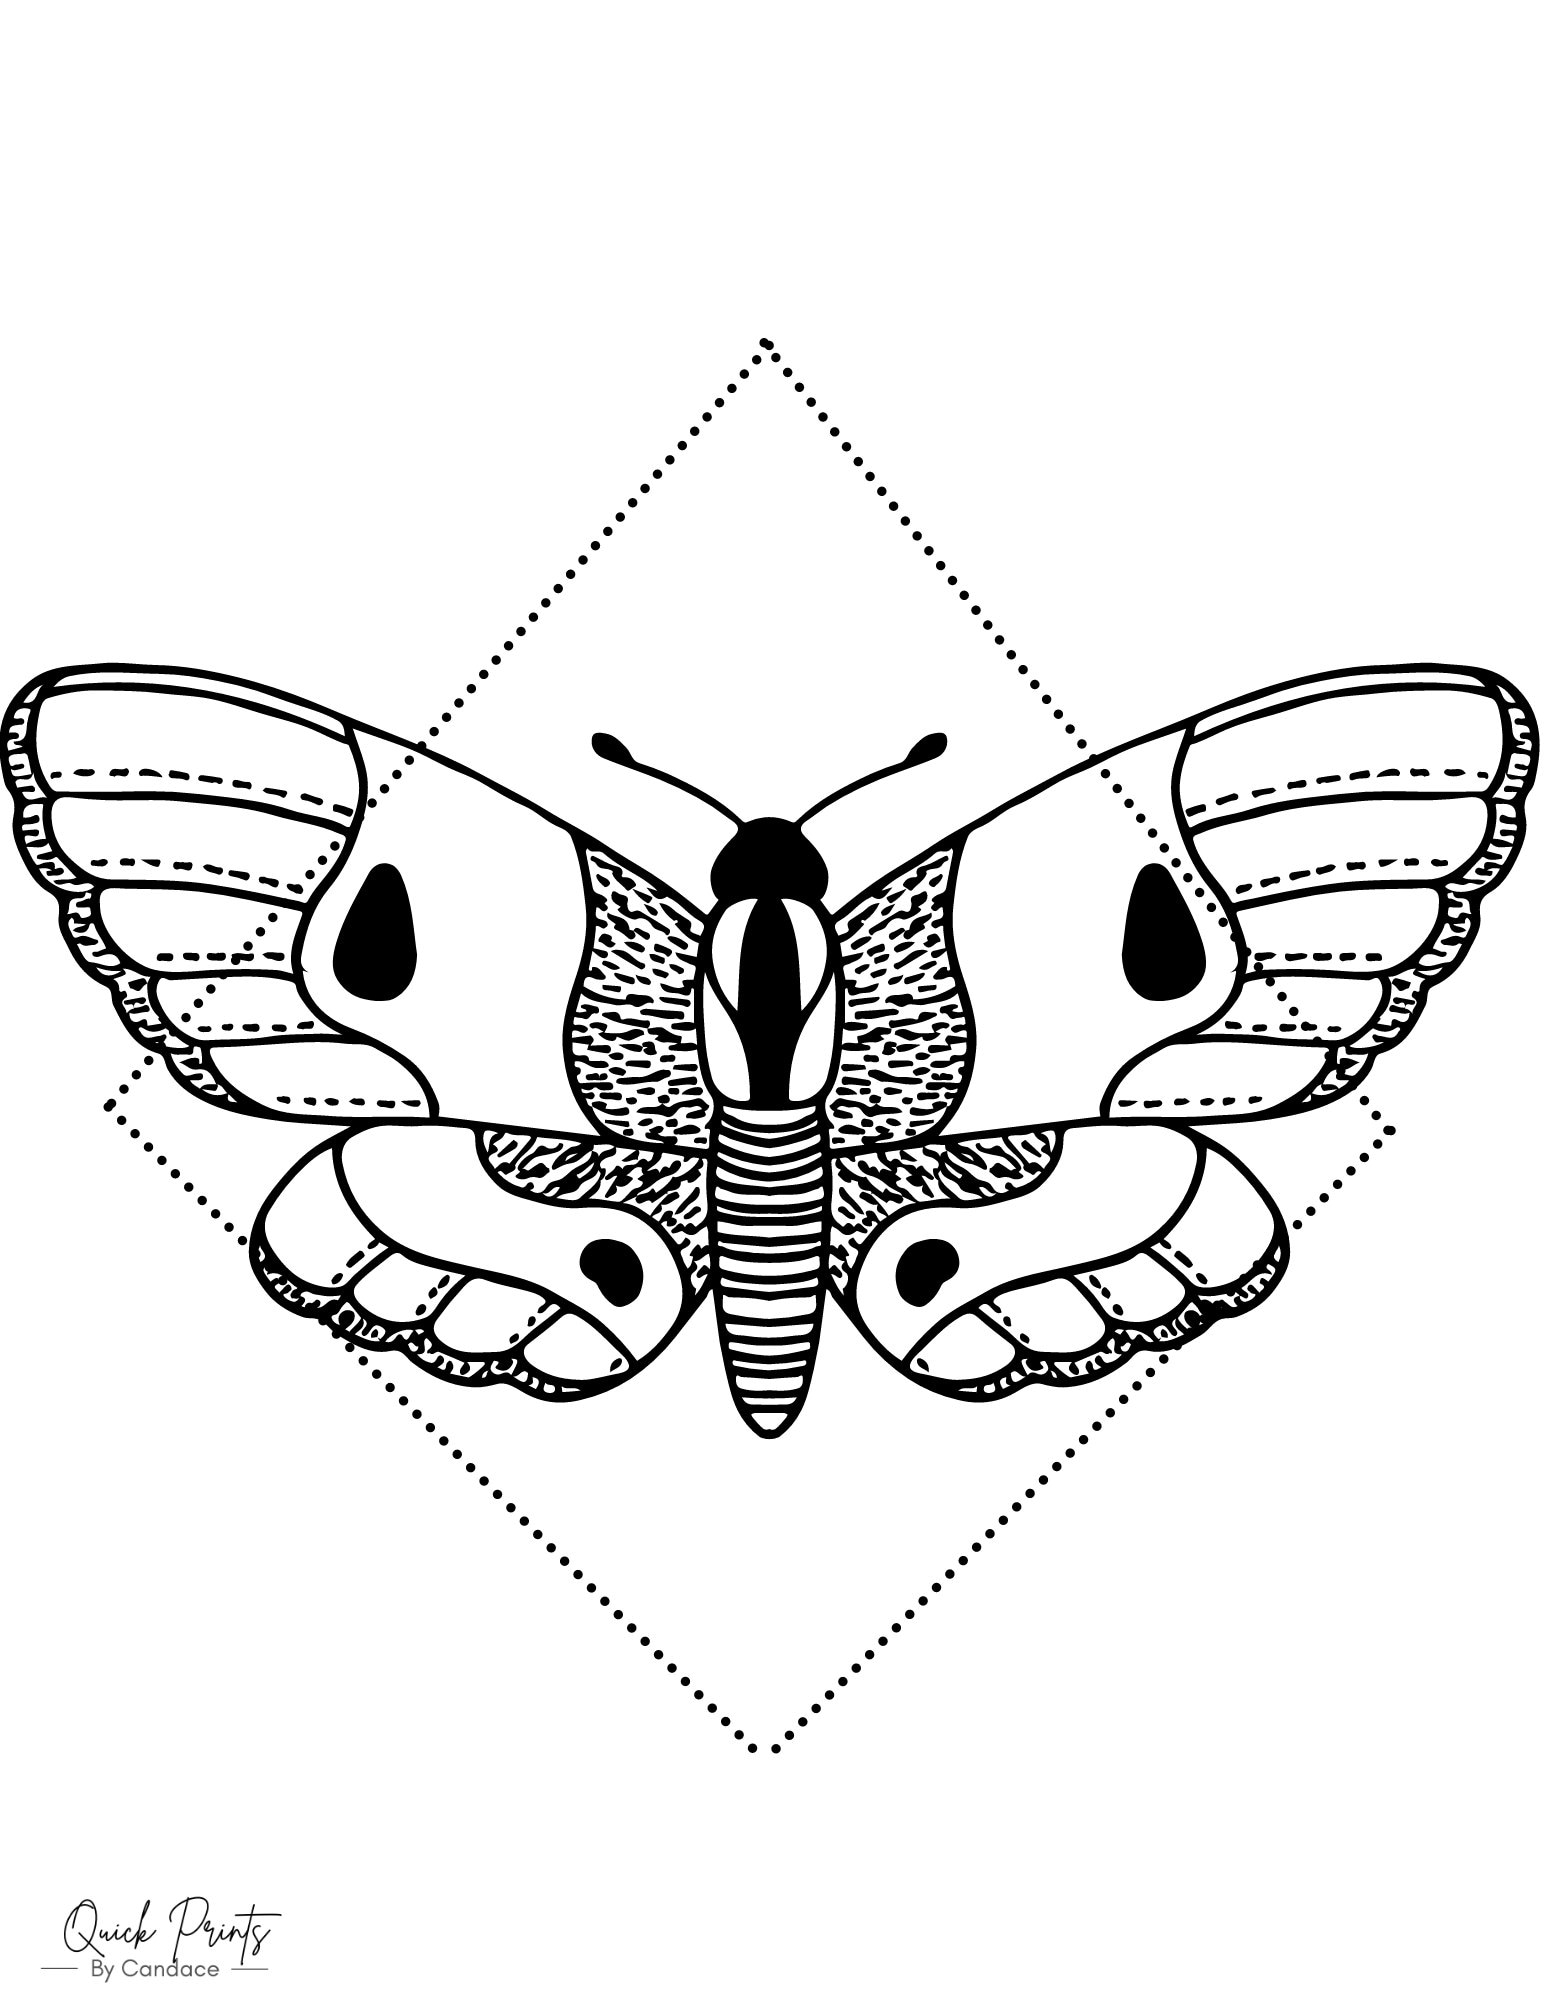 Moth Coloring Page - Etsy